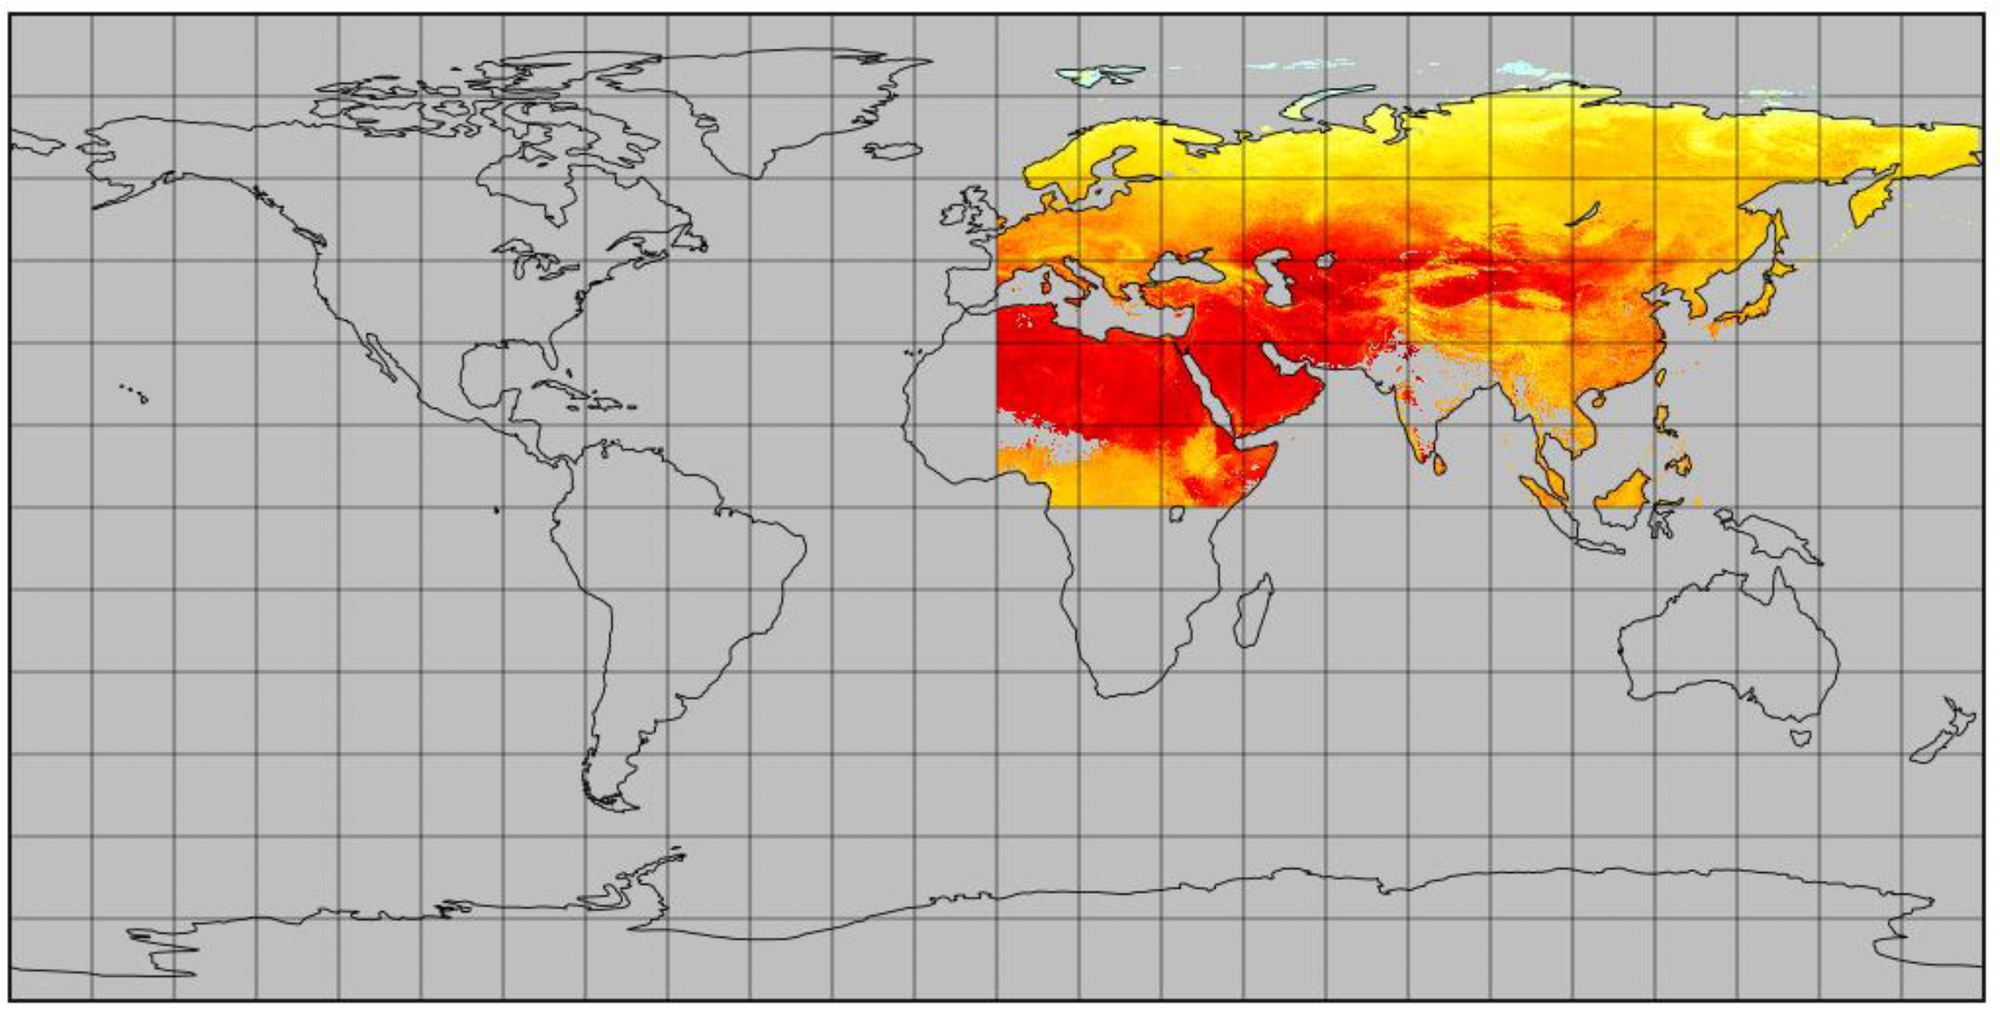 Subsetted Land Surface Temperature